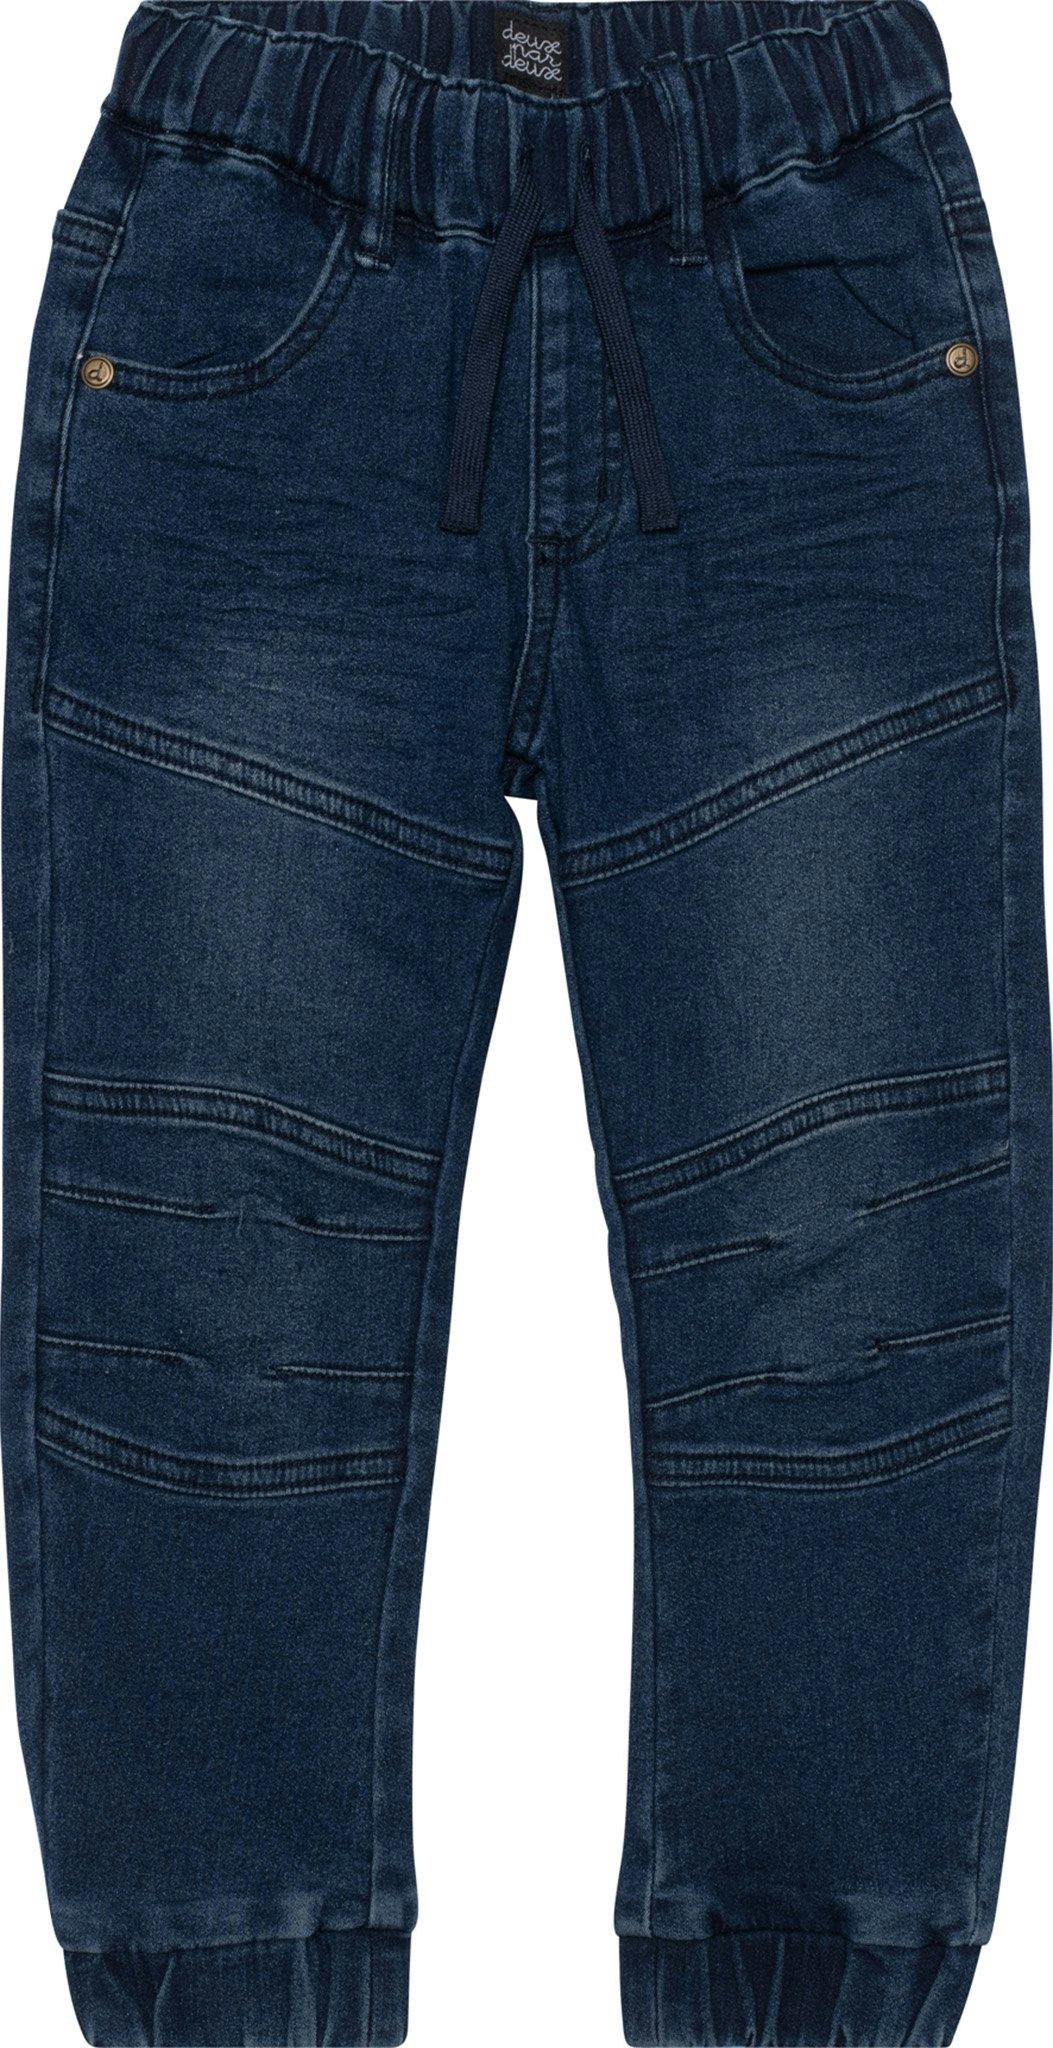 Product image for French Terry Jogger Jeans - Big Boys